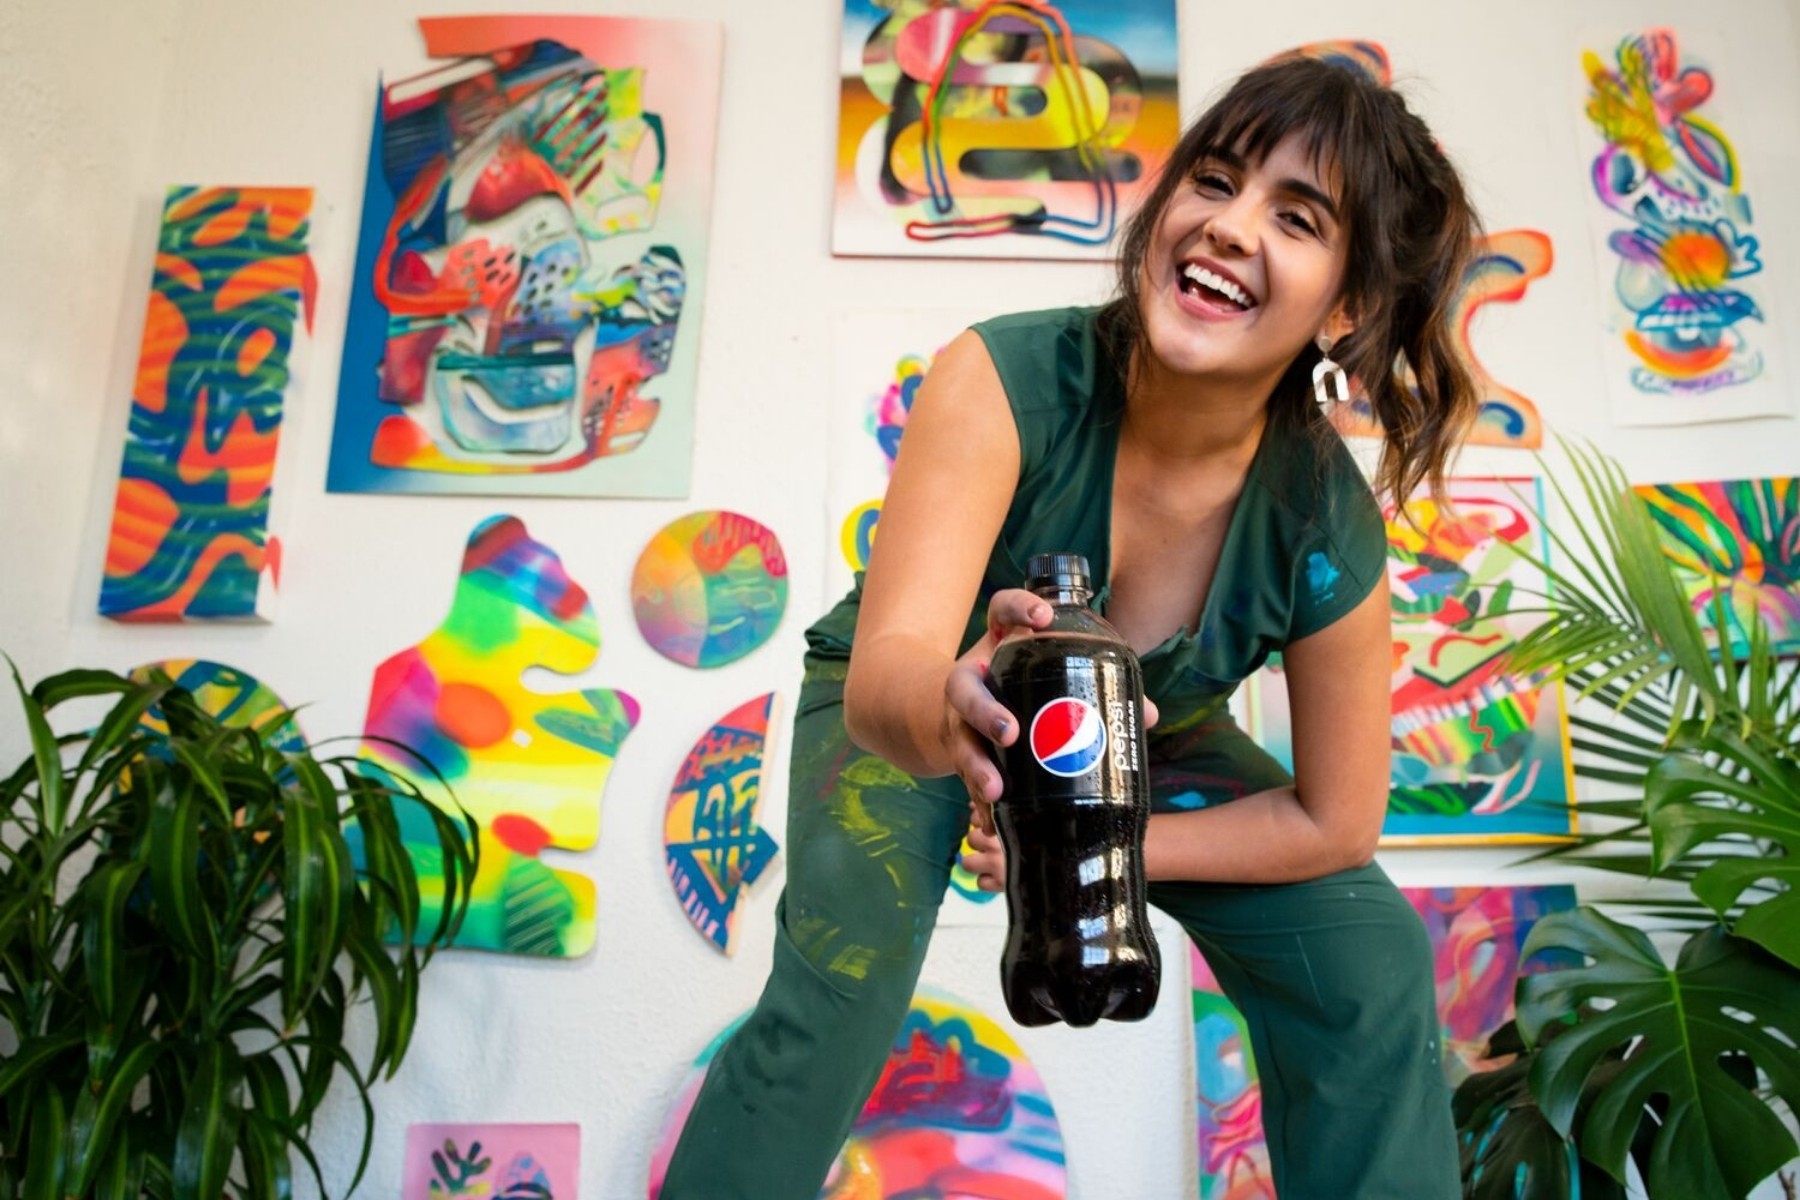 Mariell Guzman is one of the four Pepsi's tastemakers.